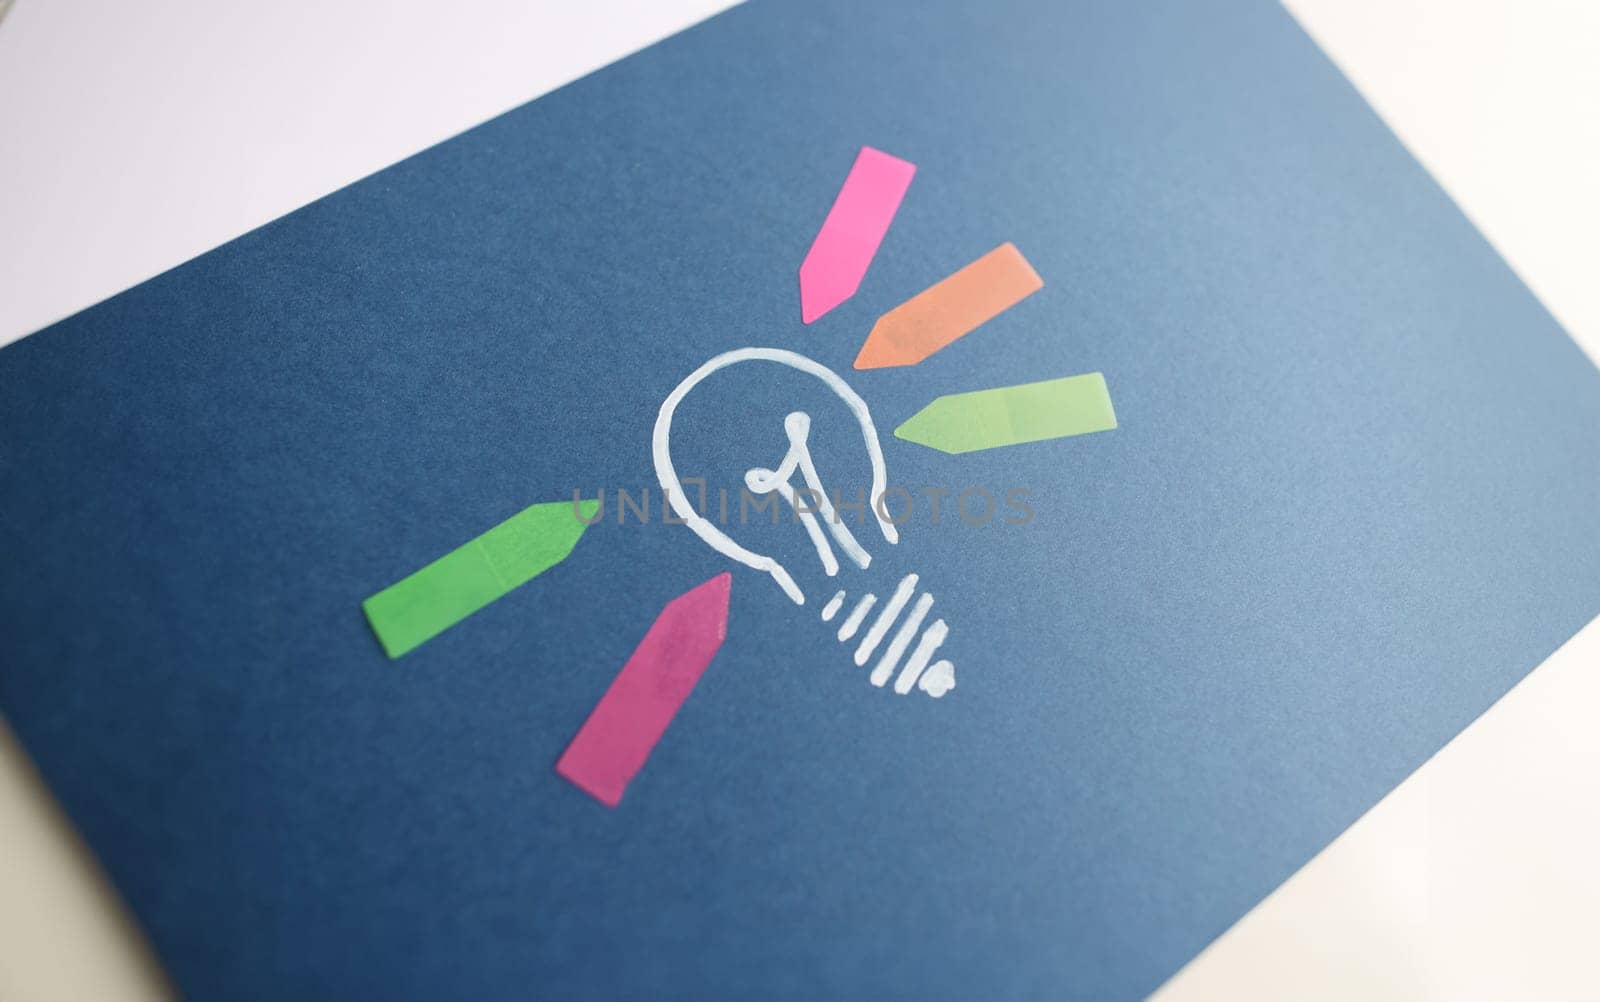 Drawn light bulb and colorful arrow stickers. New ideas and start successful business concept